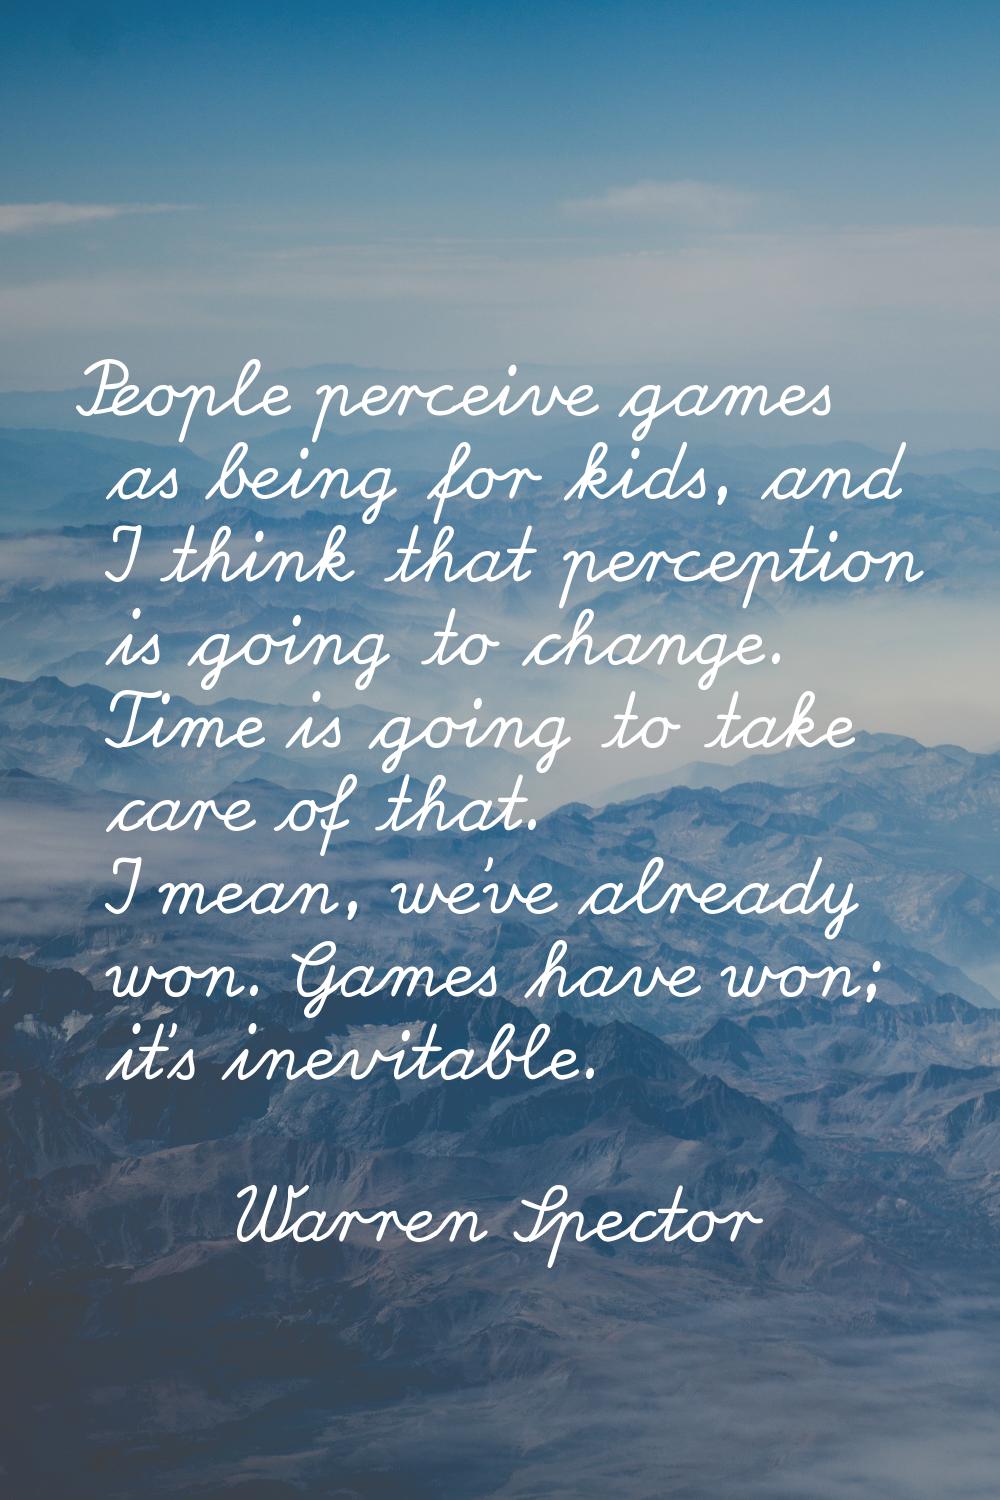 People perceive games as being for kids, and I think that perception is going to change. Time is go